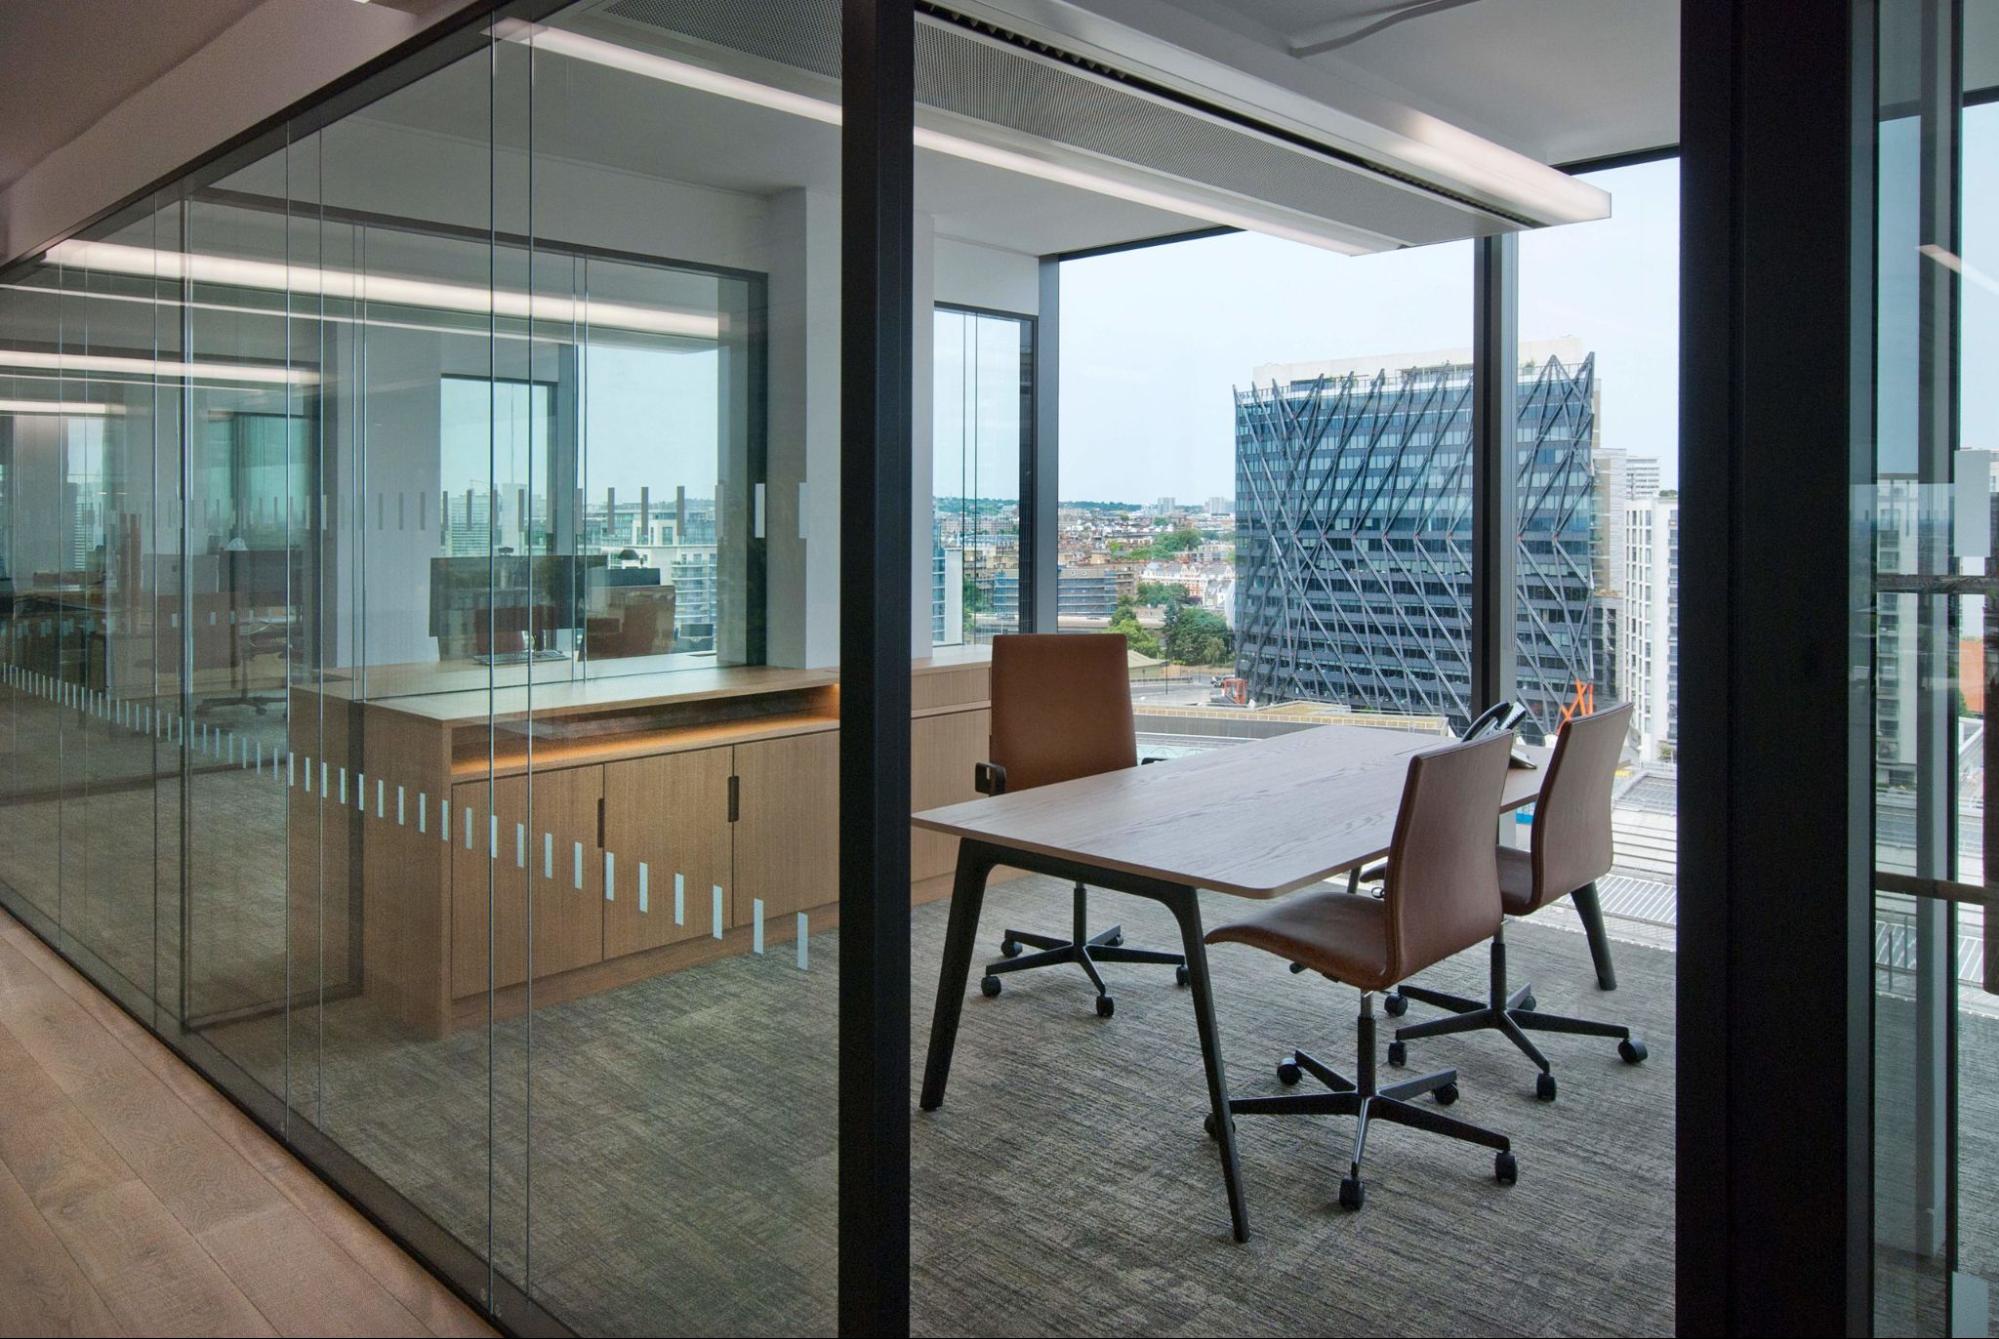 Commercial Office Renovations: Replace Wall Dividers with Glass Walls